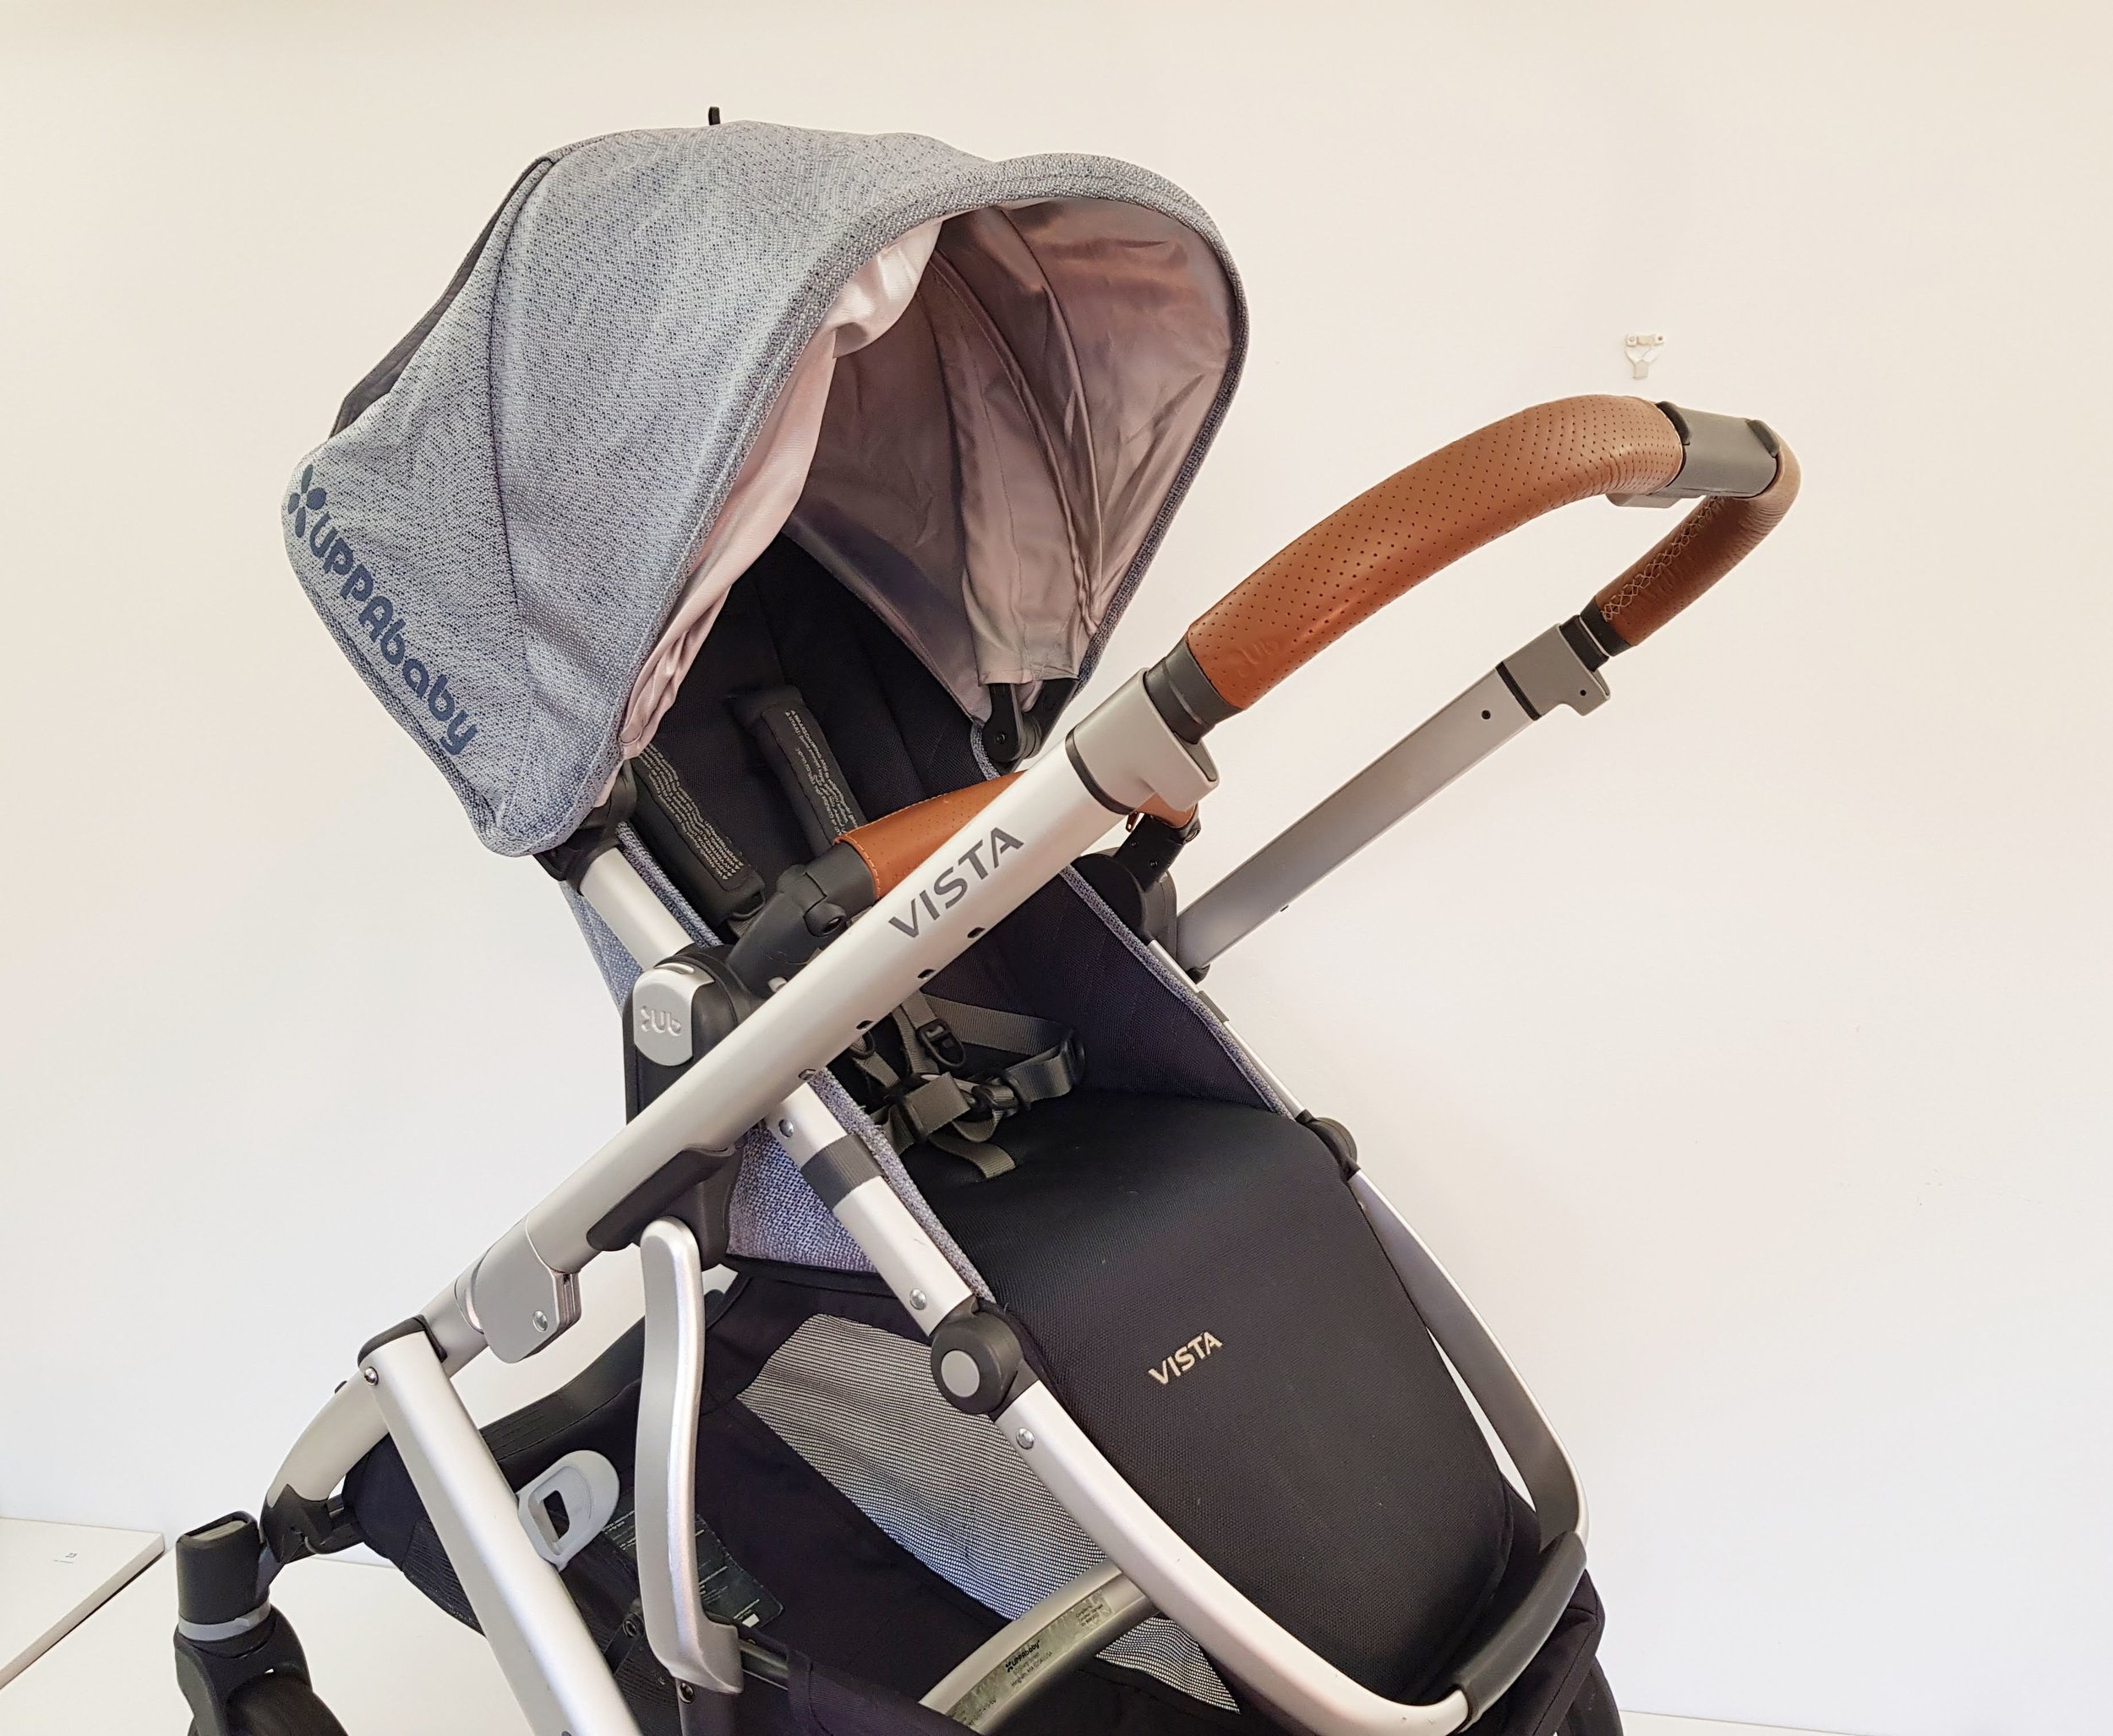 uppababy used for sale